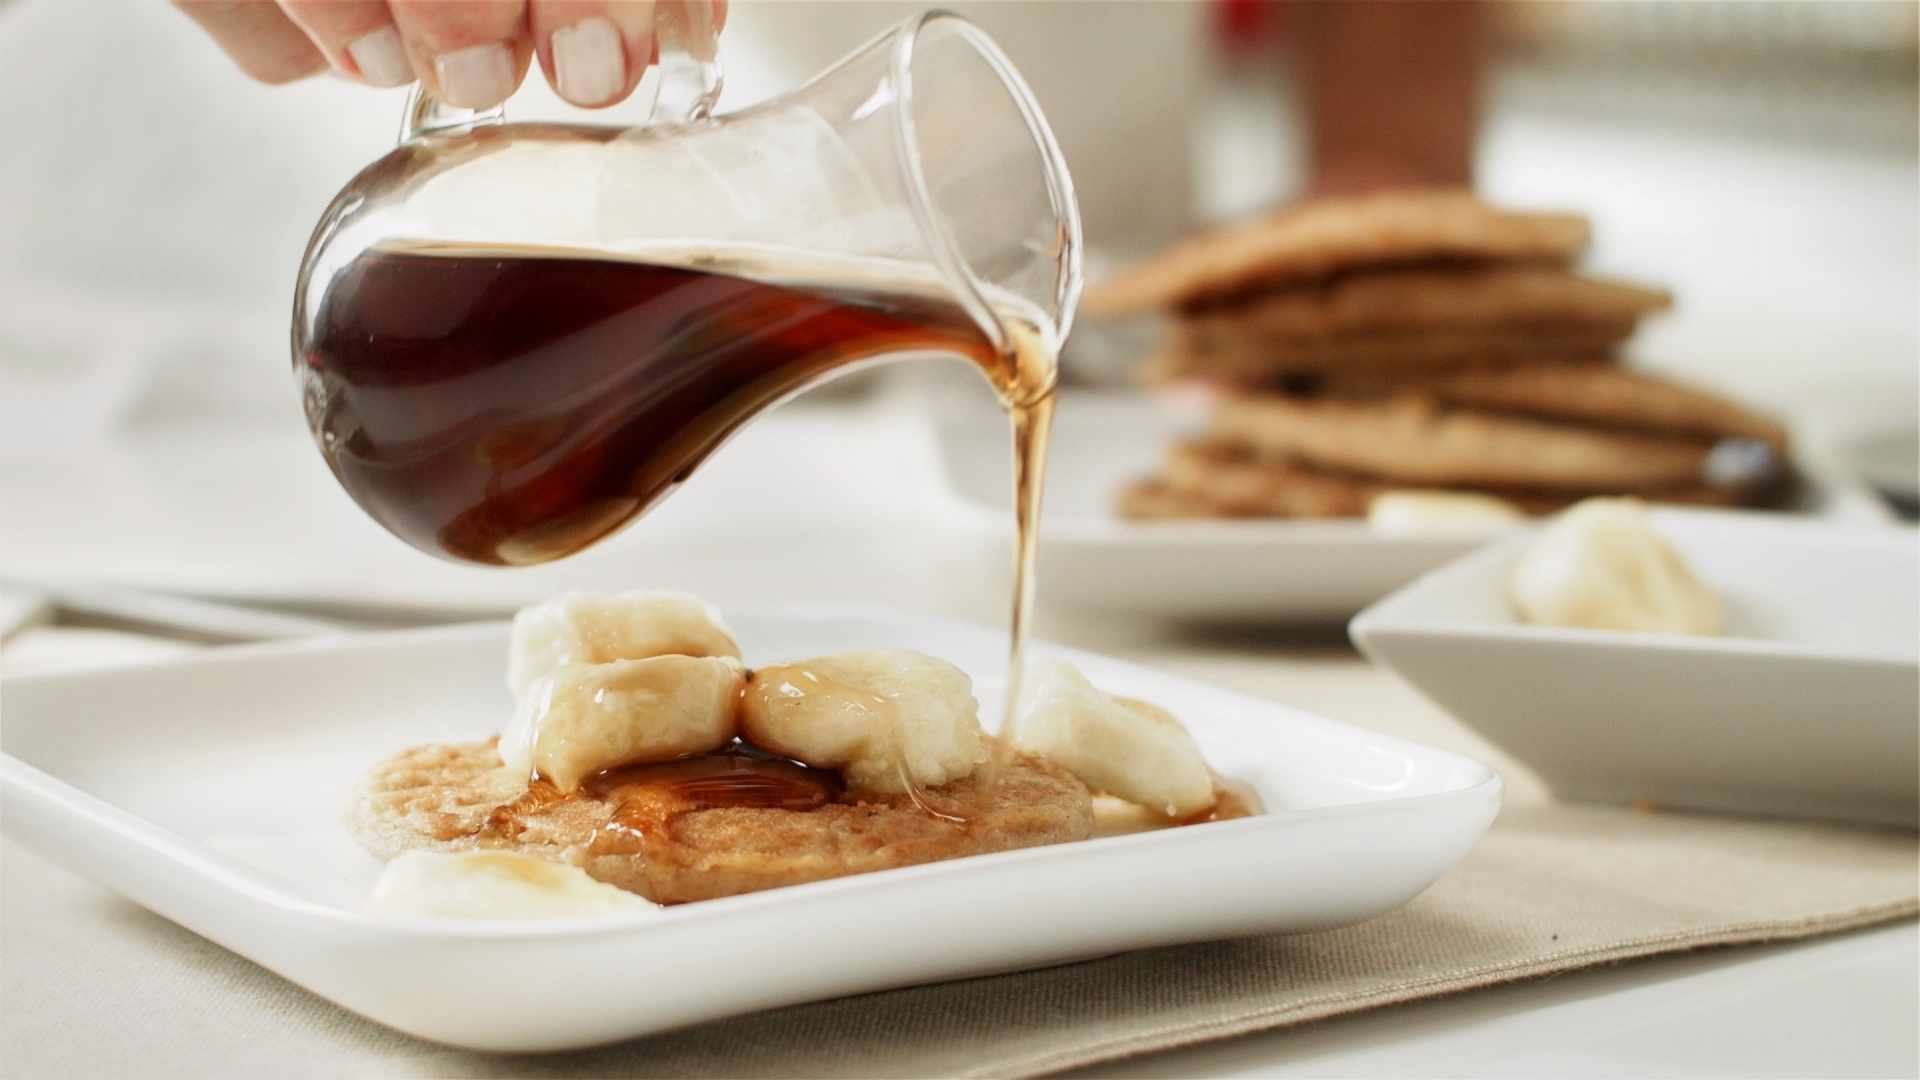 syrup being poured on pancakes